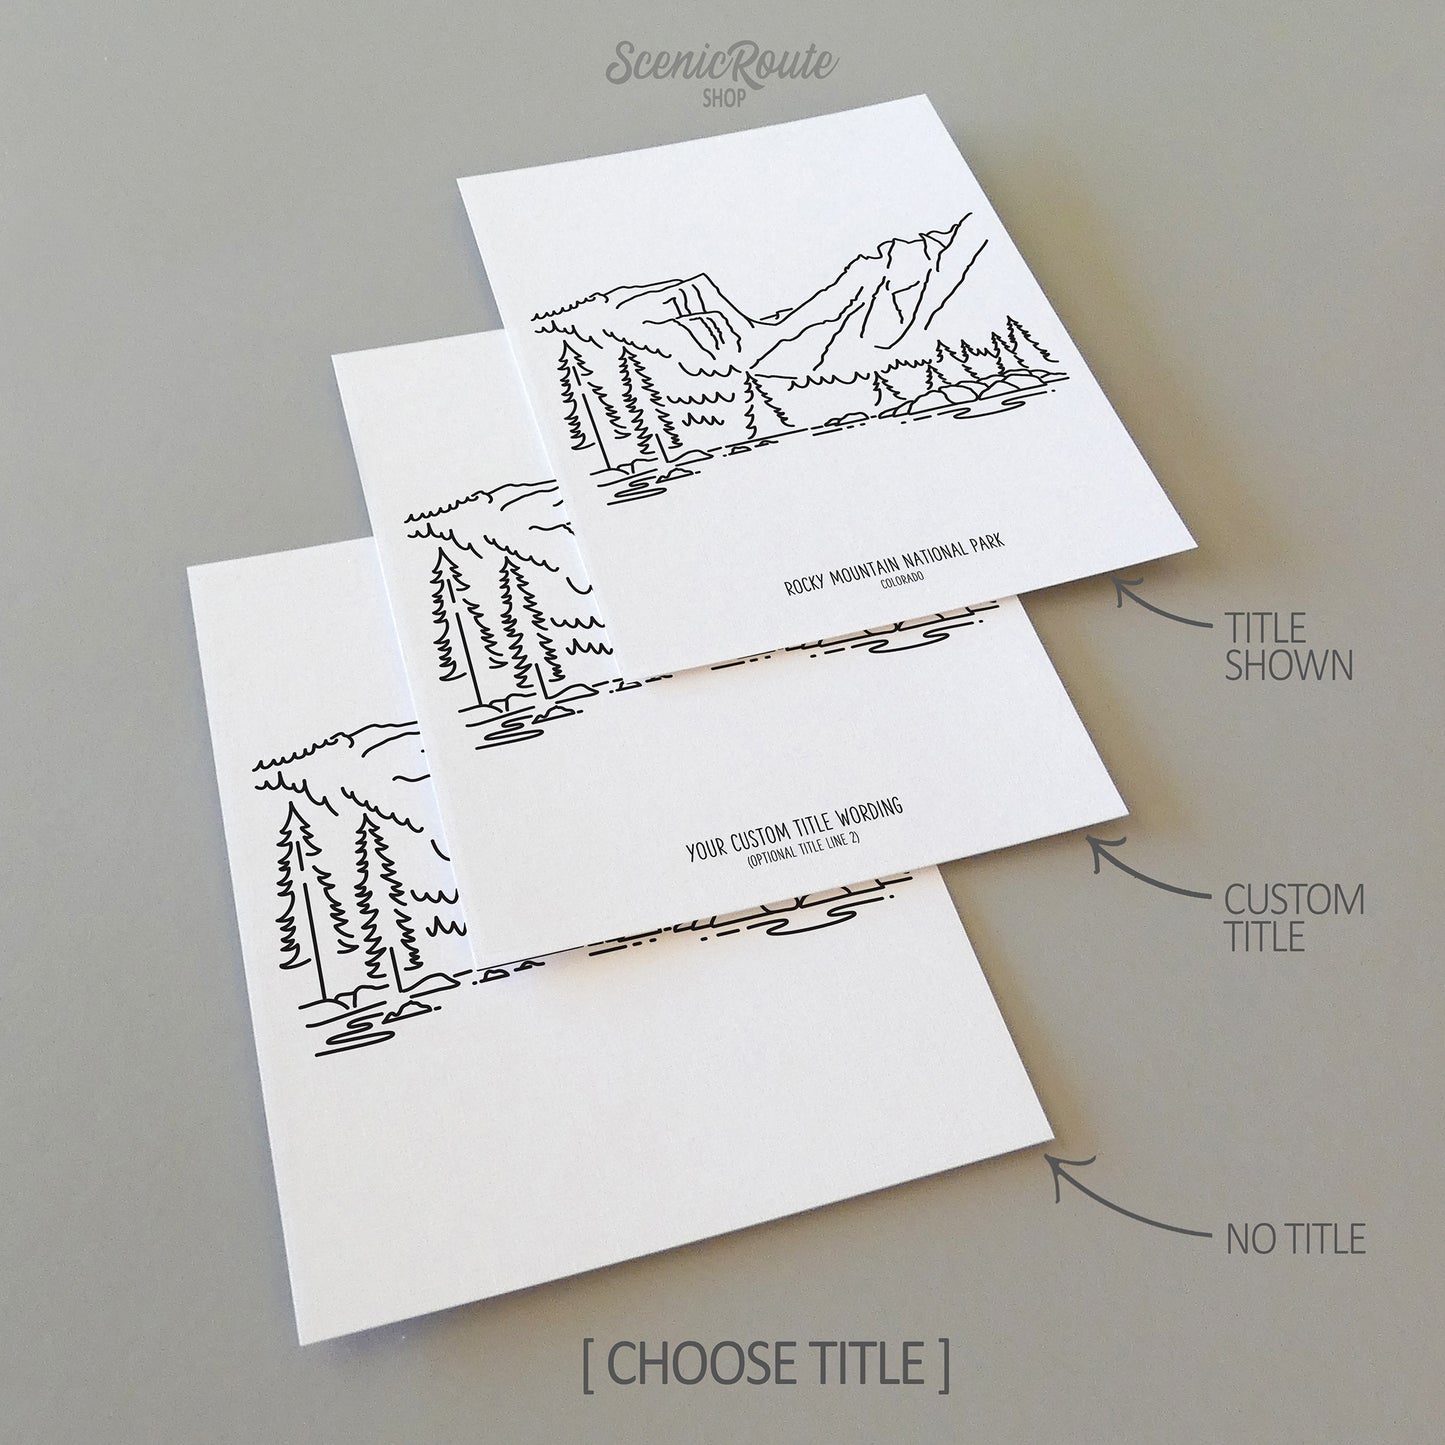 Three line art drawings of Rocky Mountain National Park on white linen paper with a gray background. The pieces are shown with title options that can be chosen and personalized.